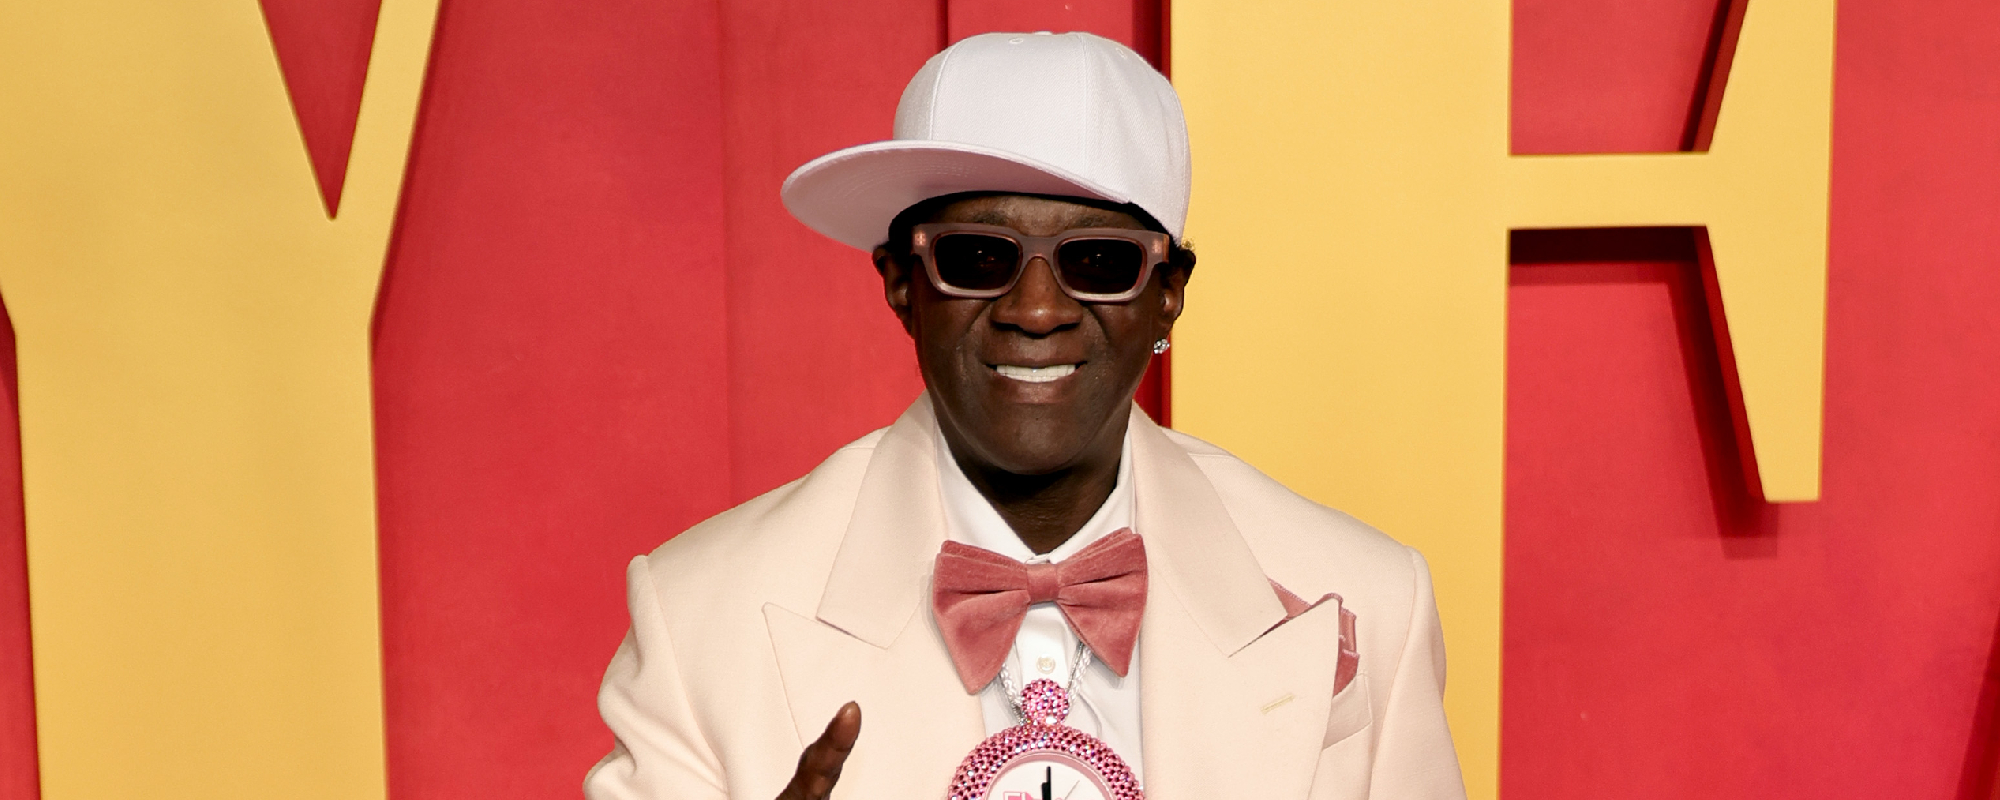 Flavor Flav Defends Jelly Roll After Country Star Quits Social Media Over Bullying